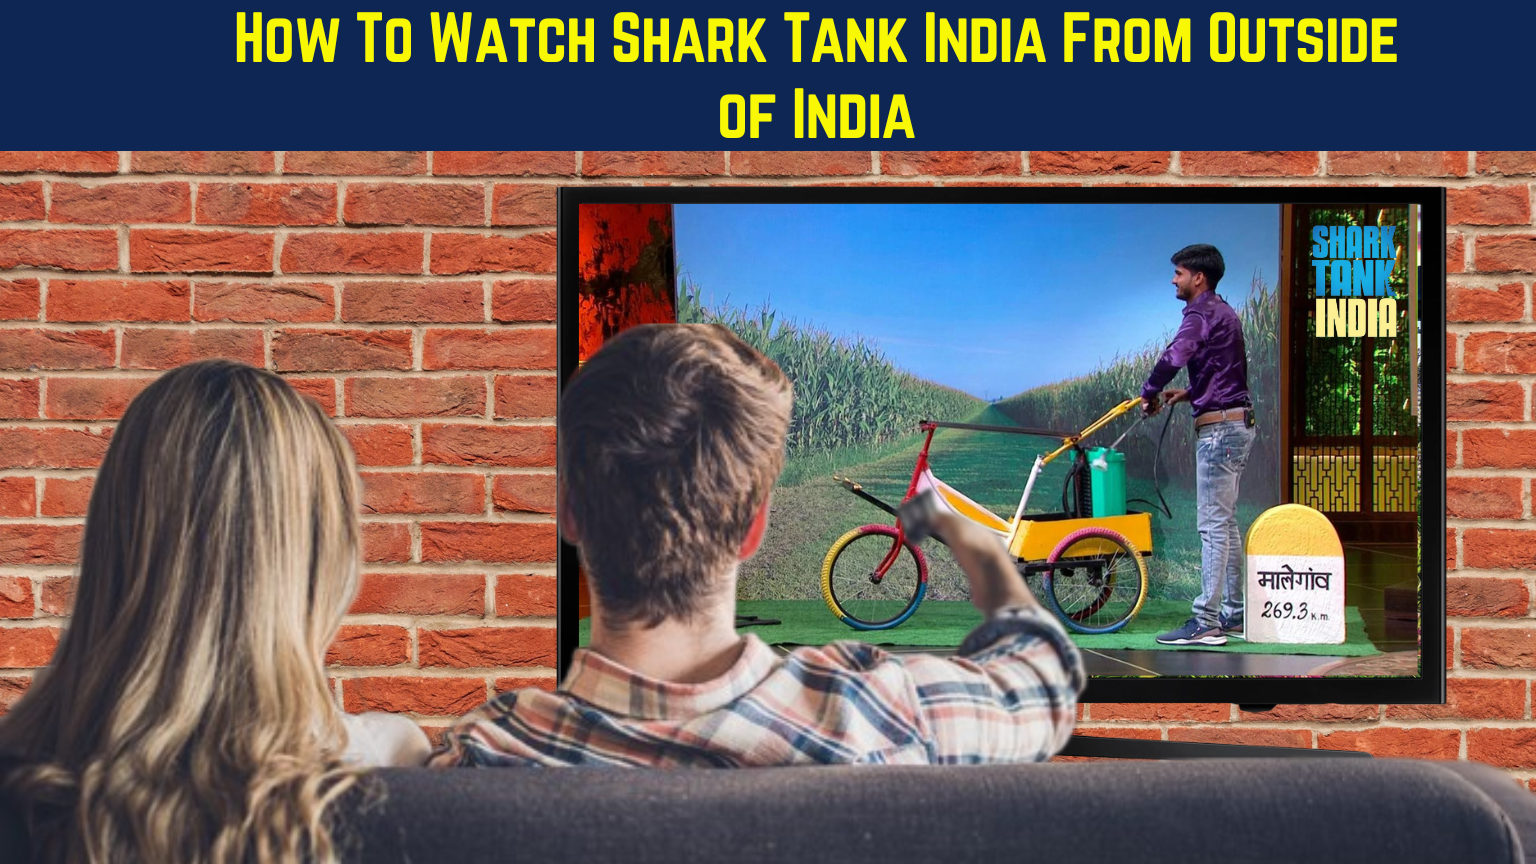 HOW TO WATCH SHARK TANK INDIA FROM US